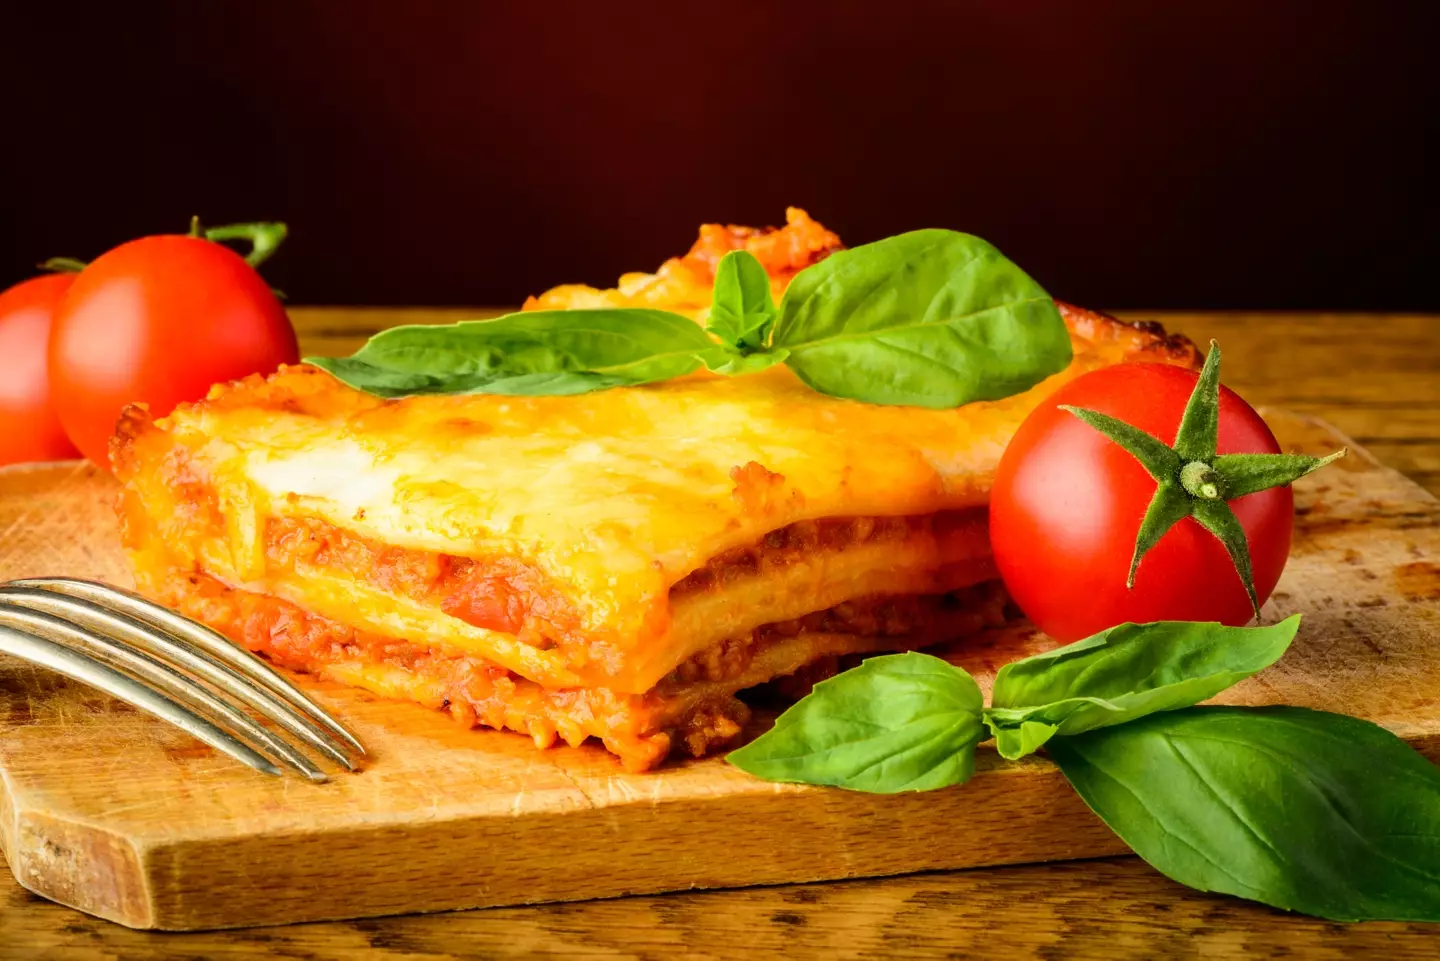 Scientists compared the new material's layers to sheets in lasagna.